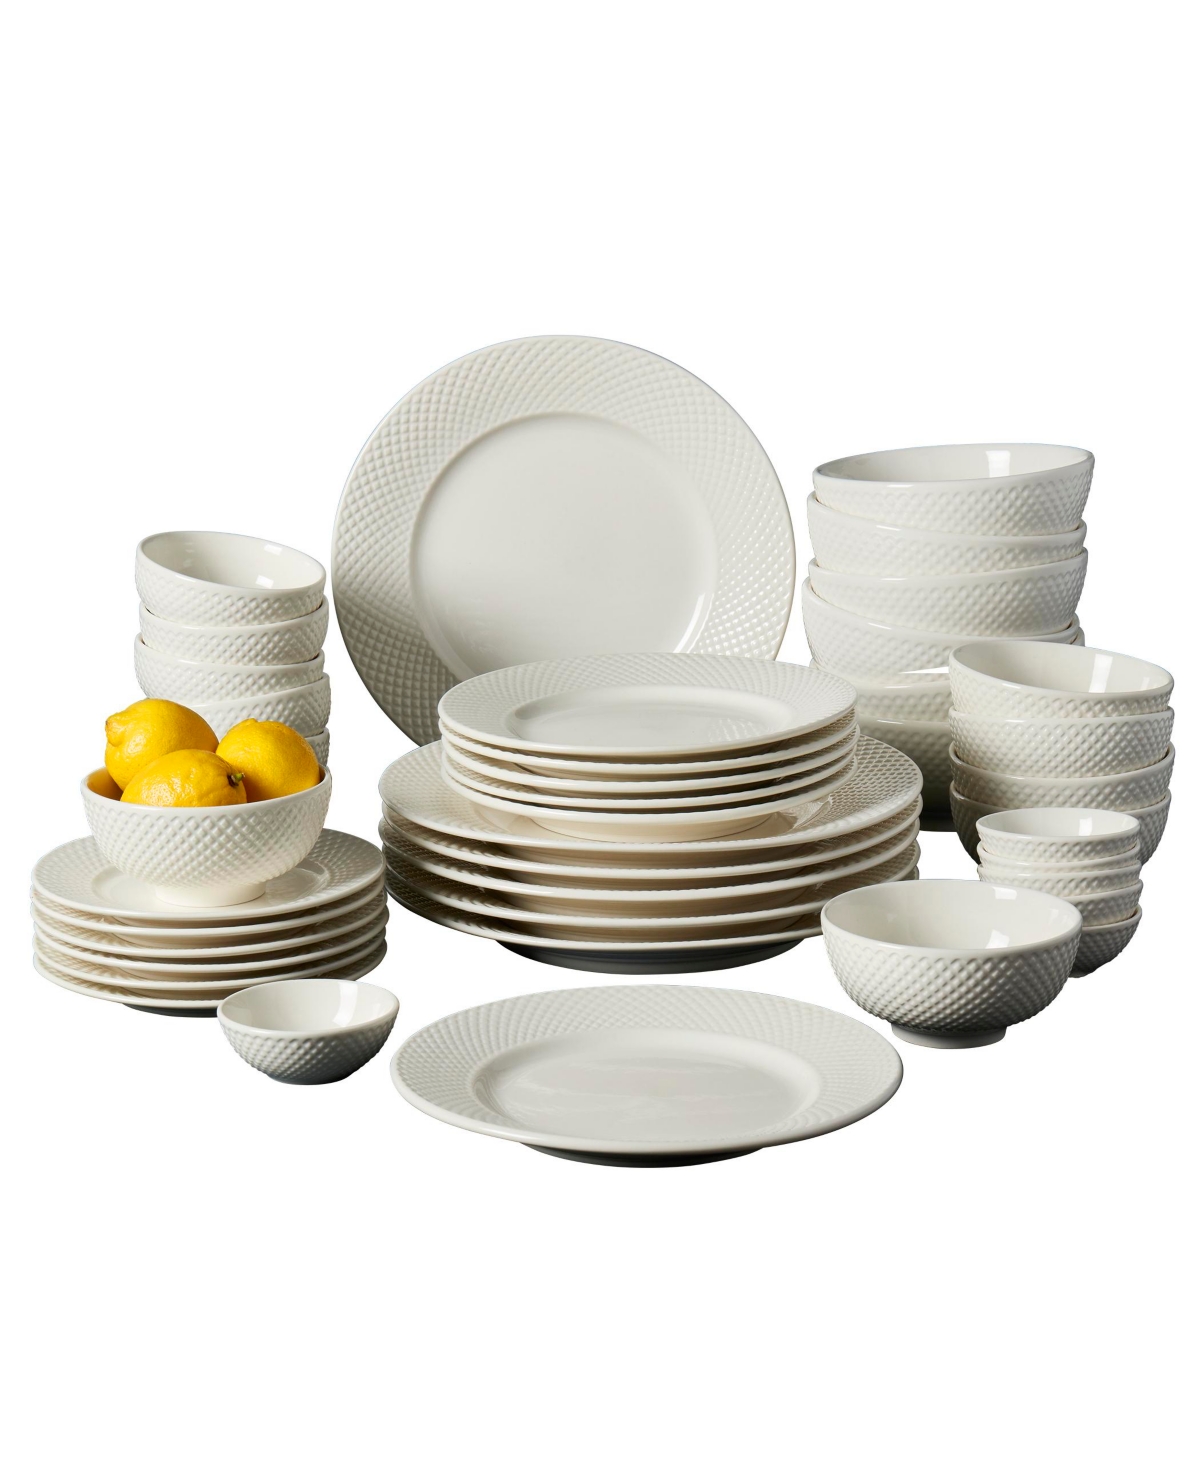 Inspiration by Denmark Amelia 42 Pc. Dinnerware Set, Service for 6, Created for Macy's - White